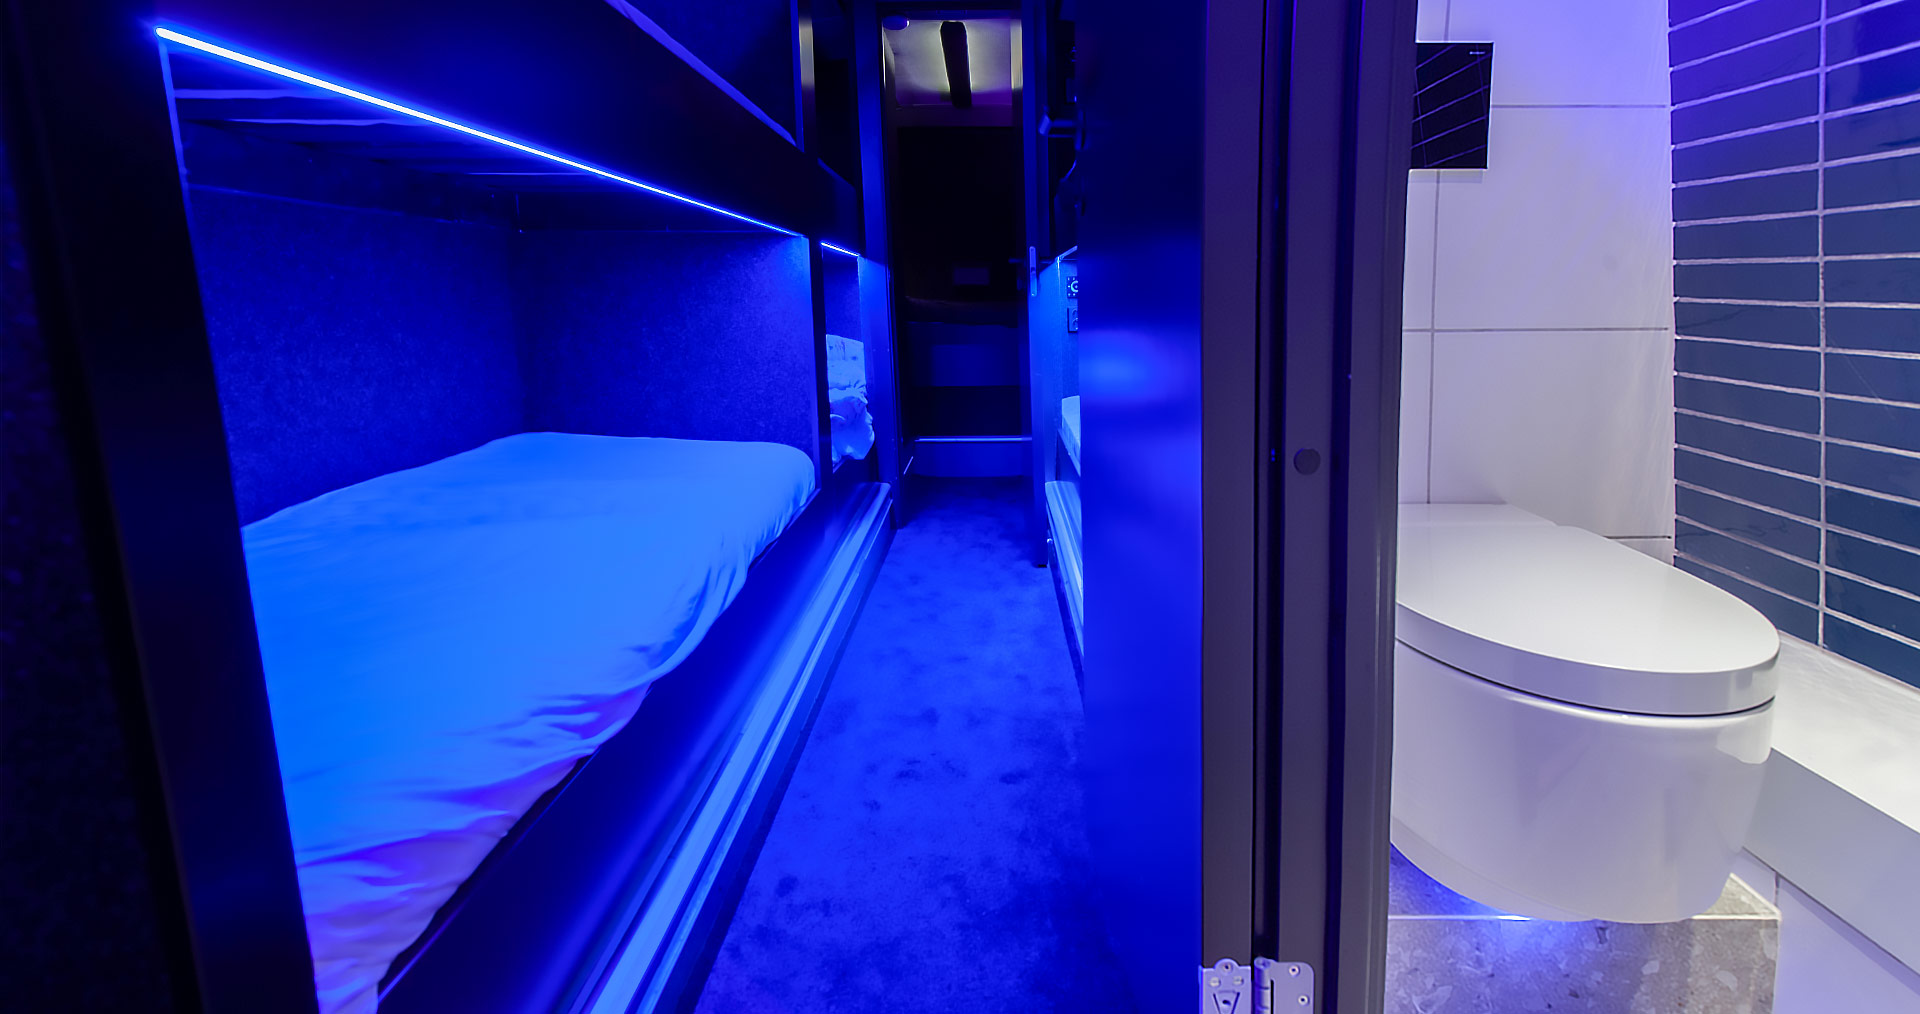 Geberit shower toilet in a modern bathroom illuminated with blue light, setting unconventional comfort standards